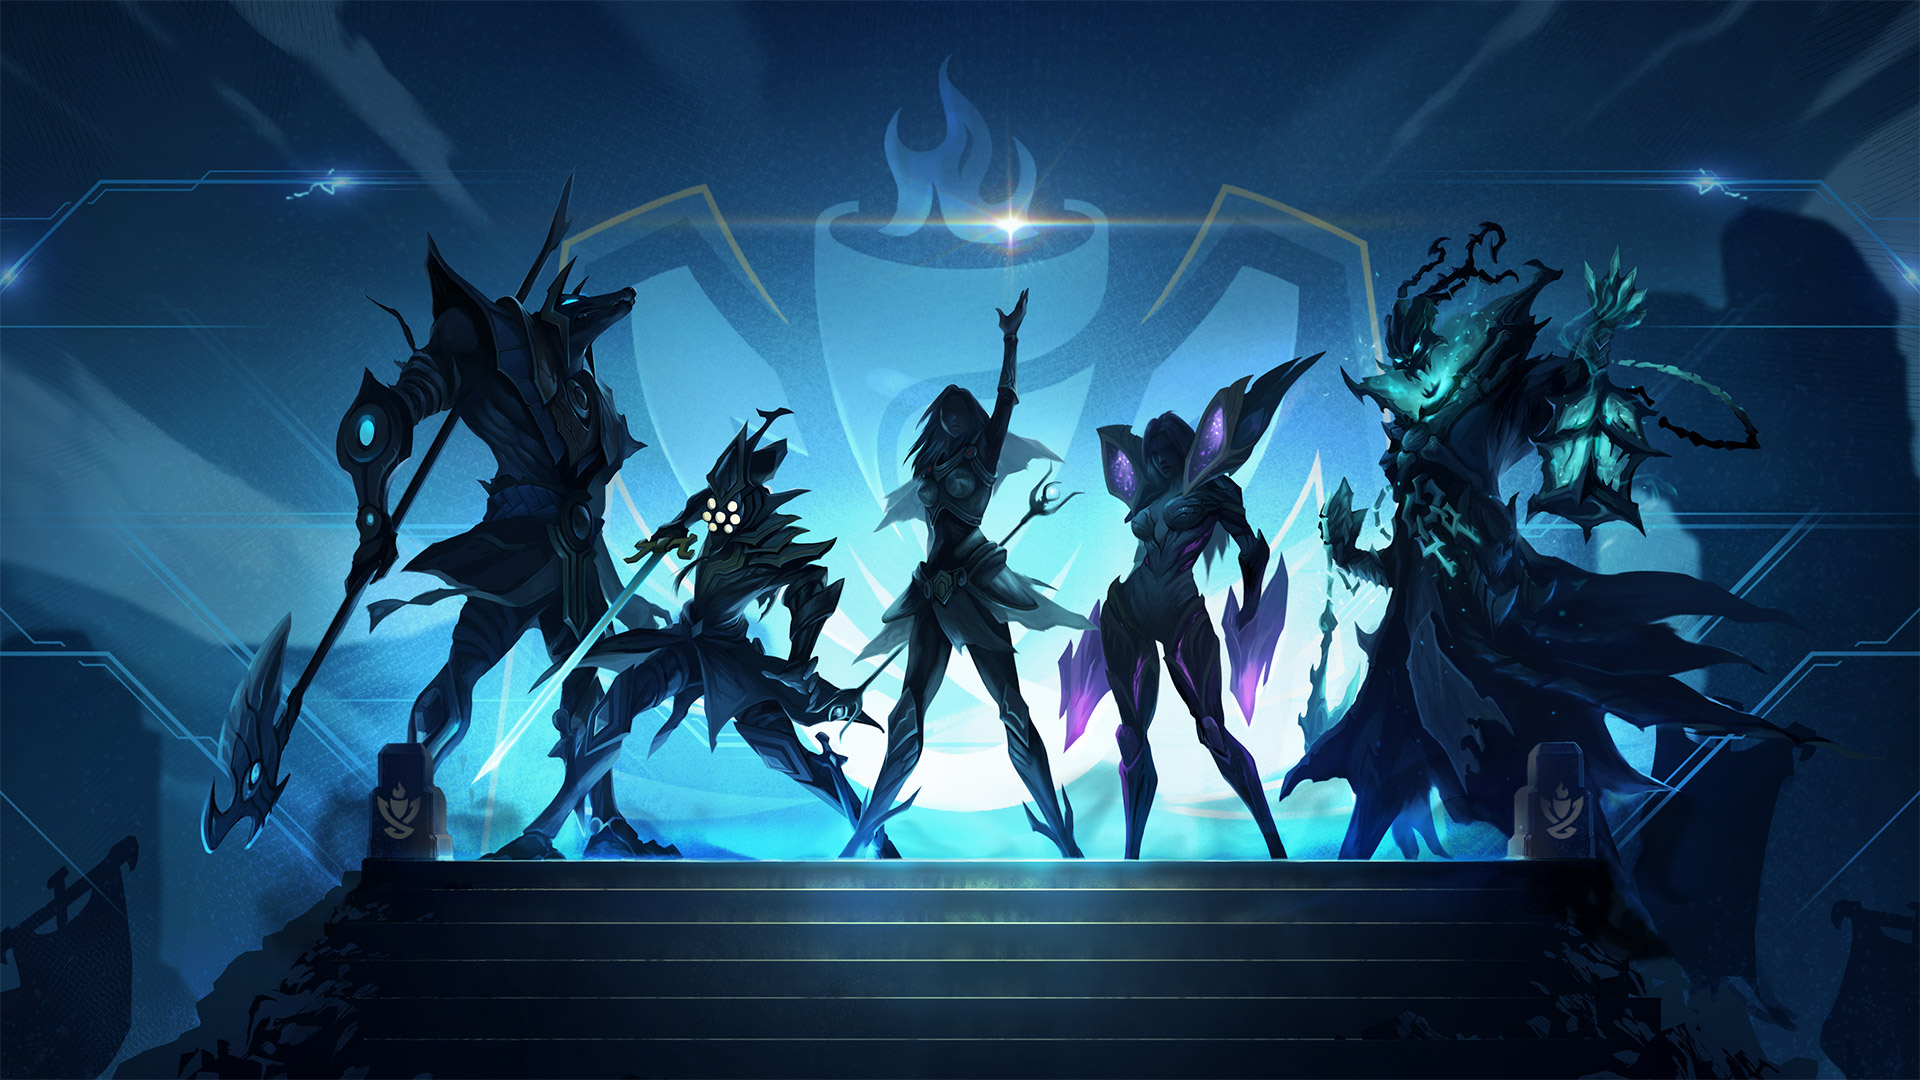 Heroes Guide : What League of Legends players could pick to dominate Heroes  of the Storm